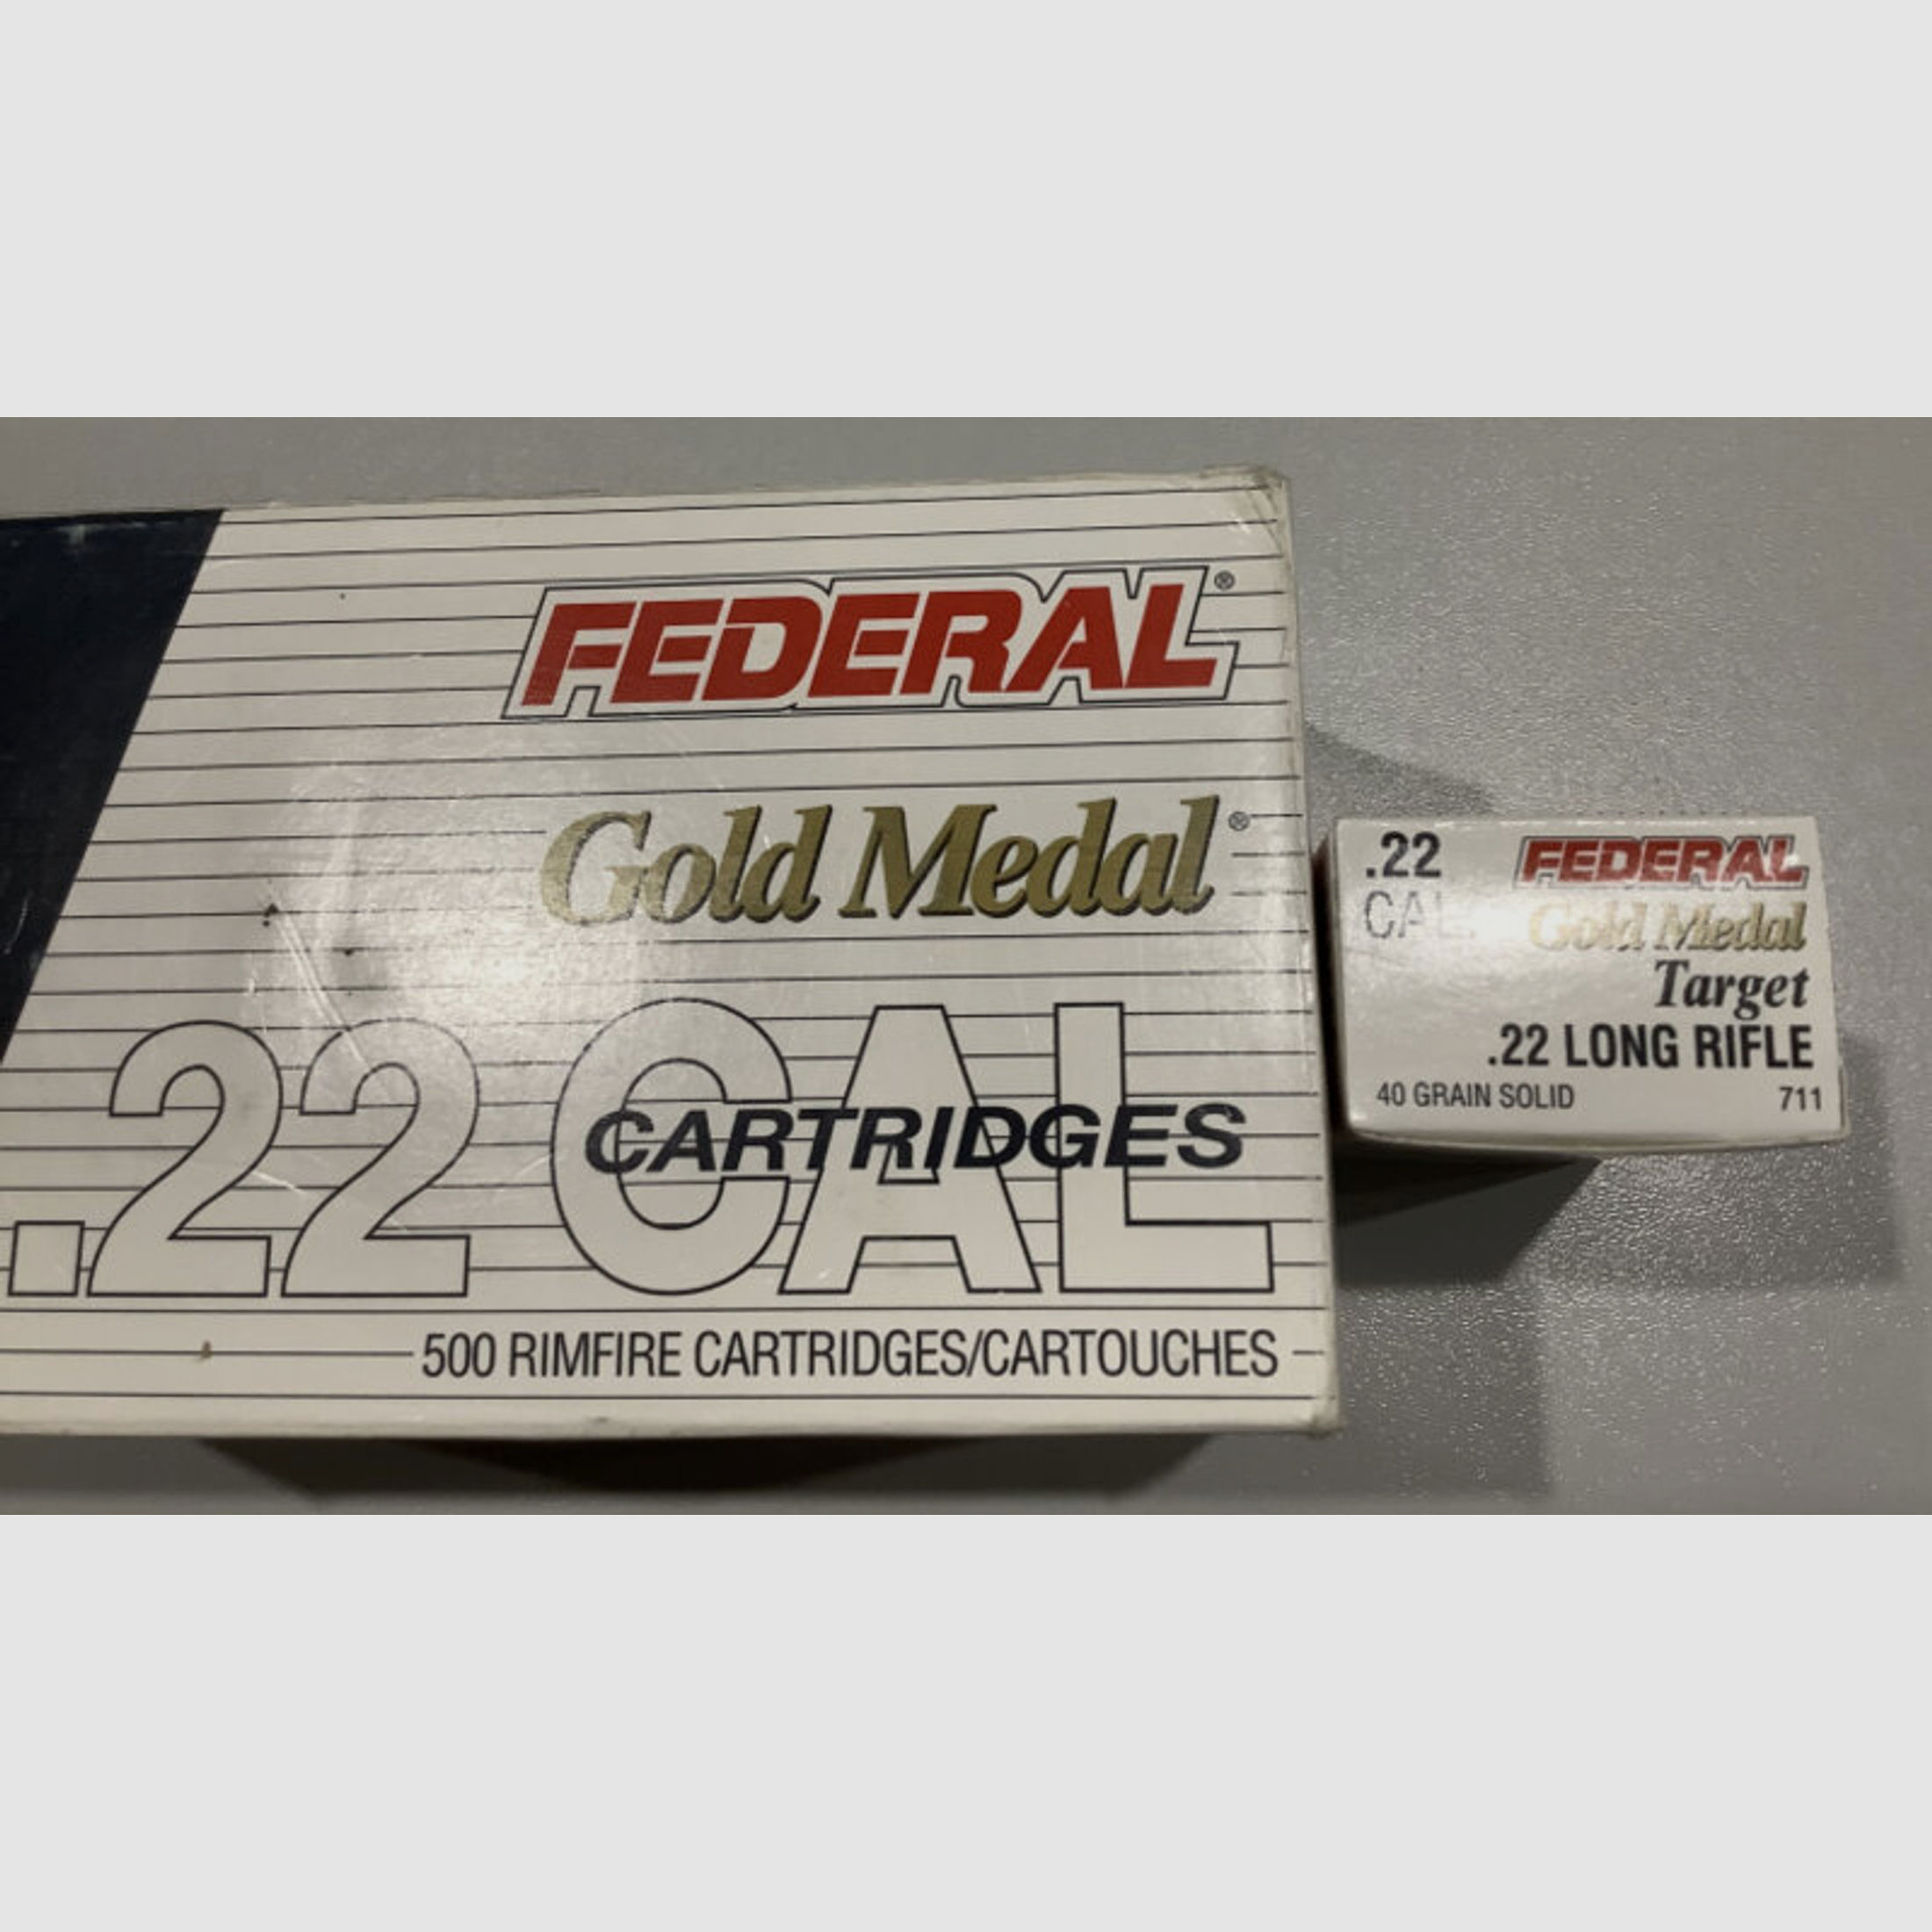 500 St. .22 lfb Federal GOLD MEDAL Target Made in the USA